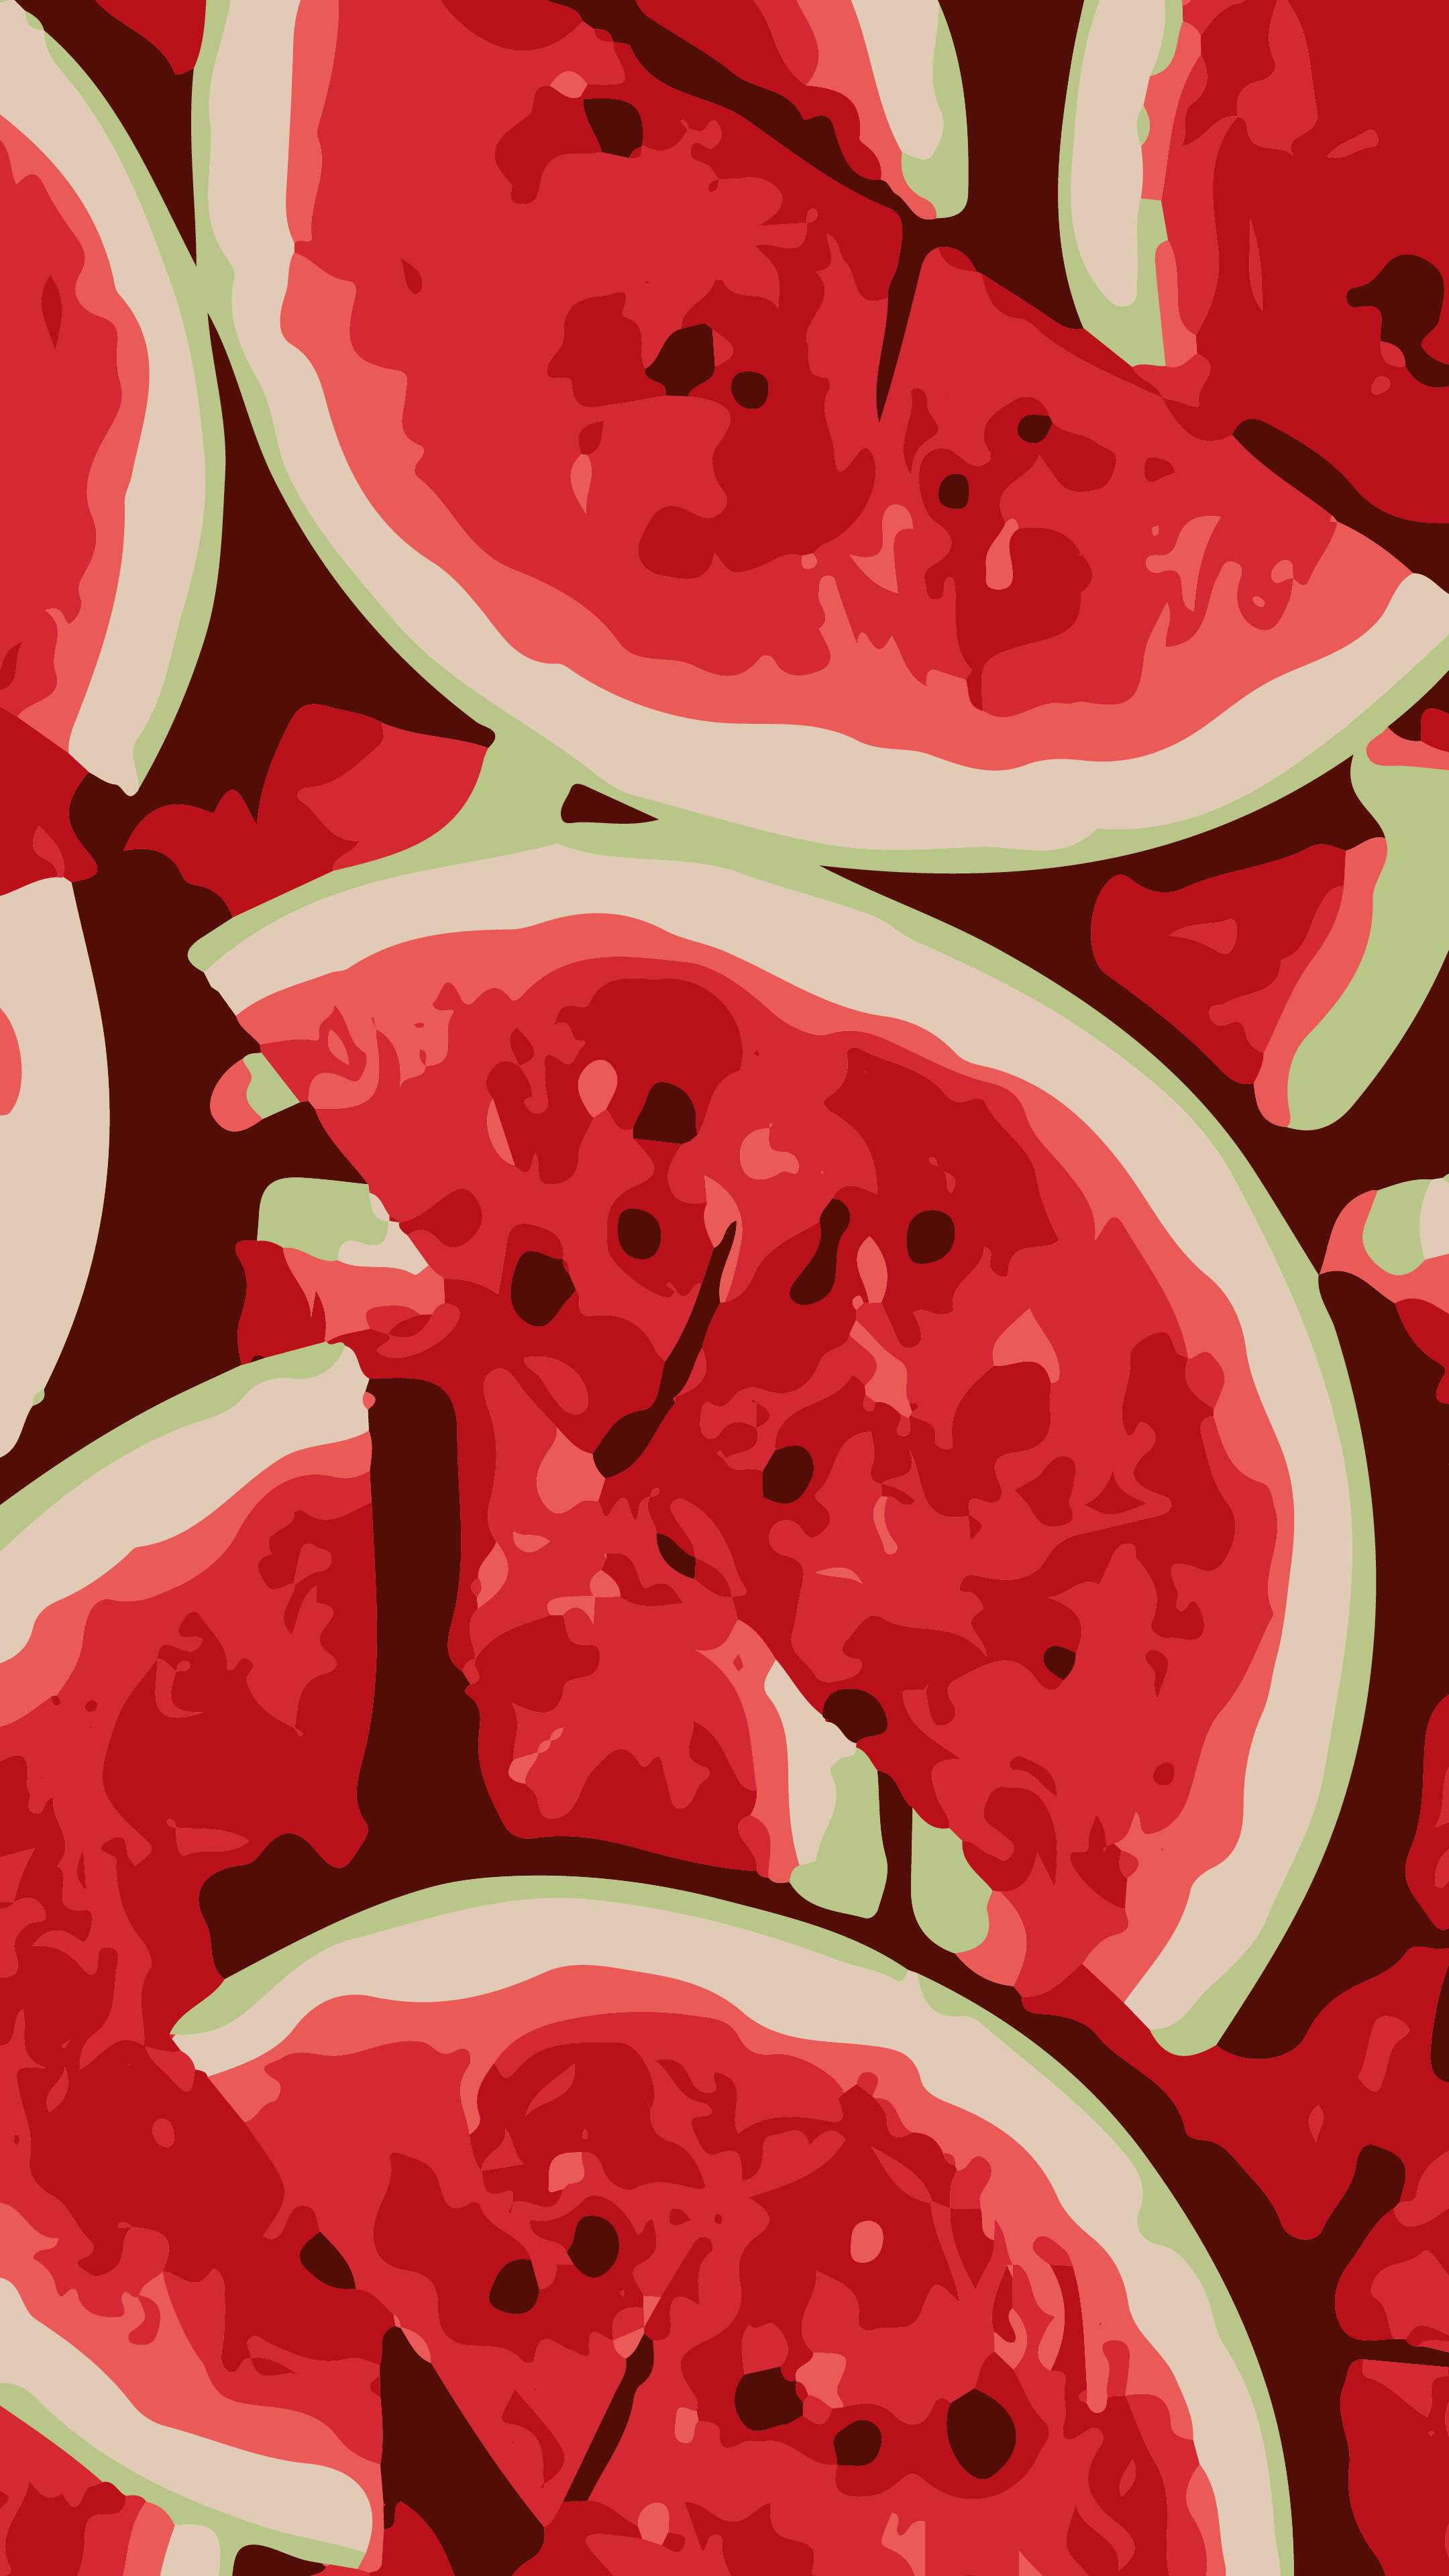 A watermelon pattern with slices of the fruit - Watermelon